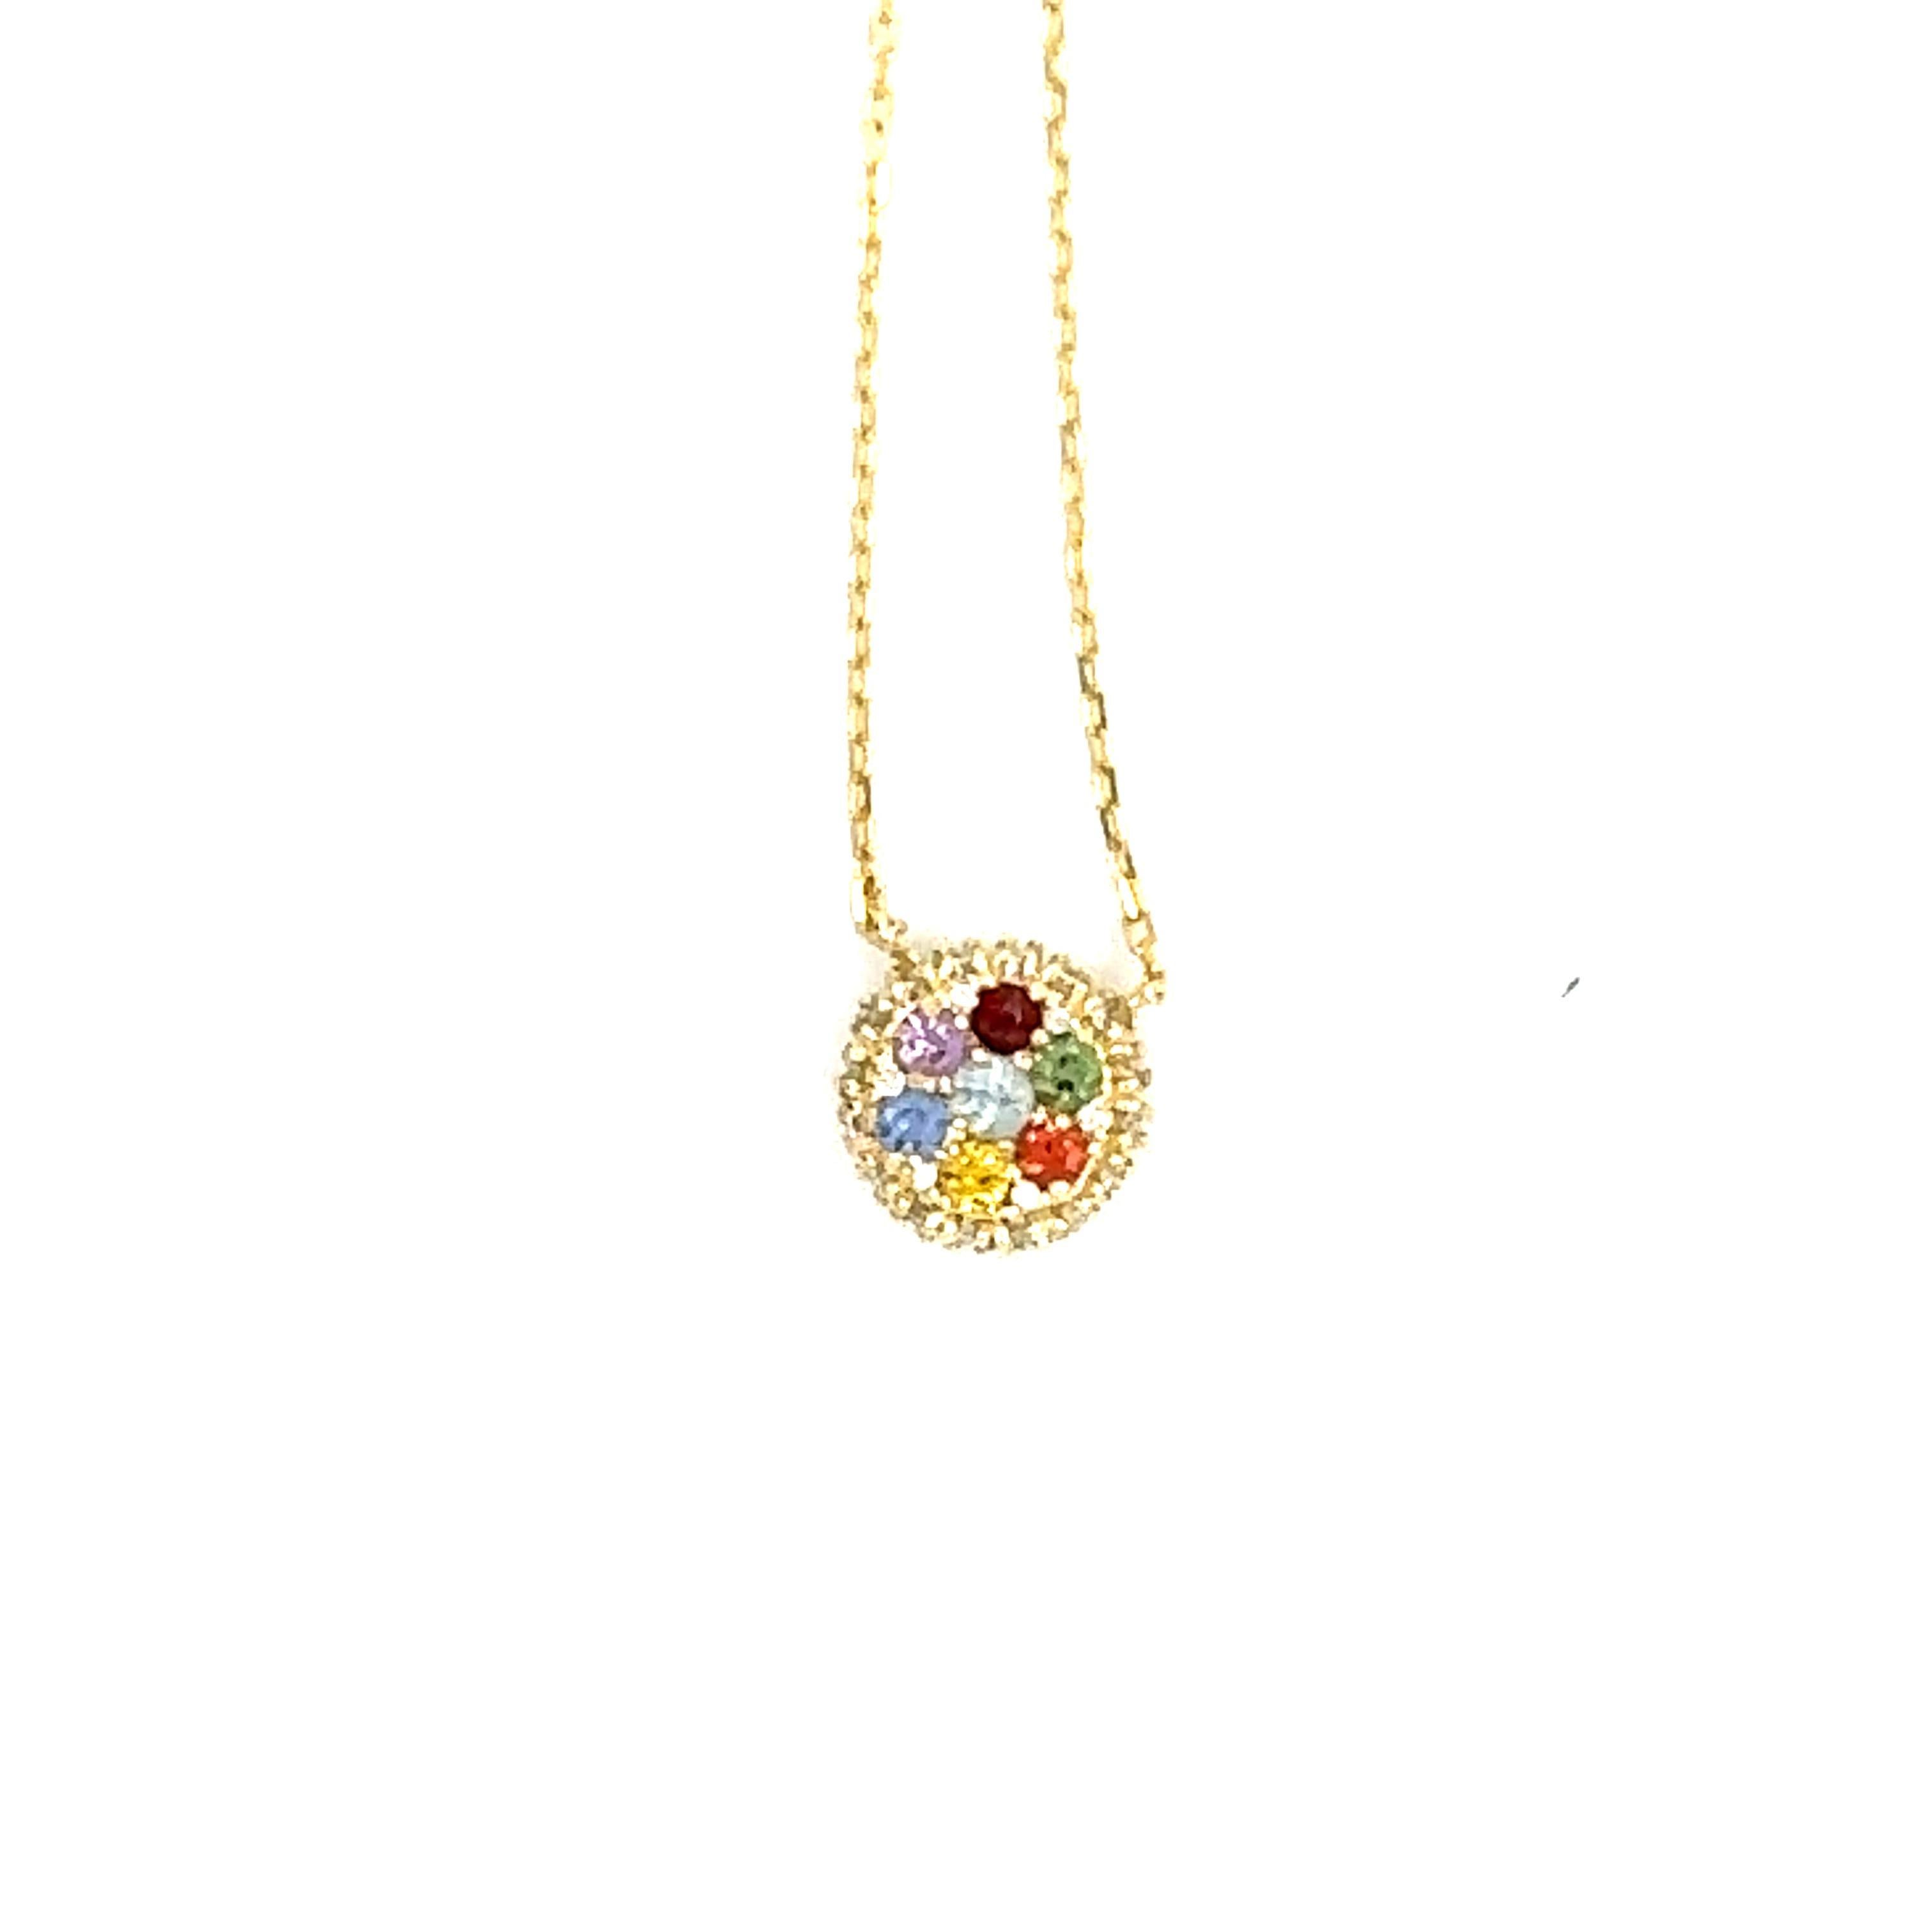 1.09 Carat Multicolor Sapphire and Diamond Yellow Gold Chain Pendant

Beautiful chain pendant to elevate your daily wardrobe

Item Specifics:

7 Round Cut natural Multicolor Sapphires that weigh 0.80 carats
22 Round Cut natural Diamonds that weigh